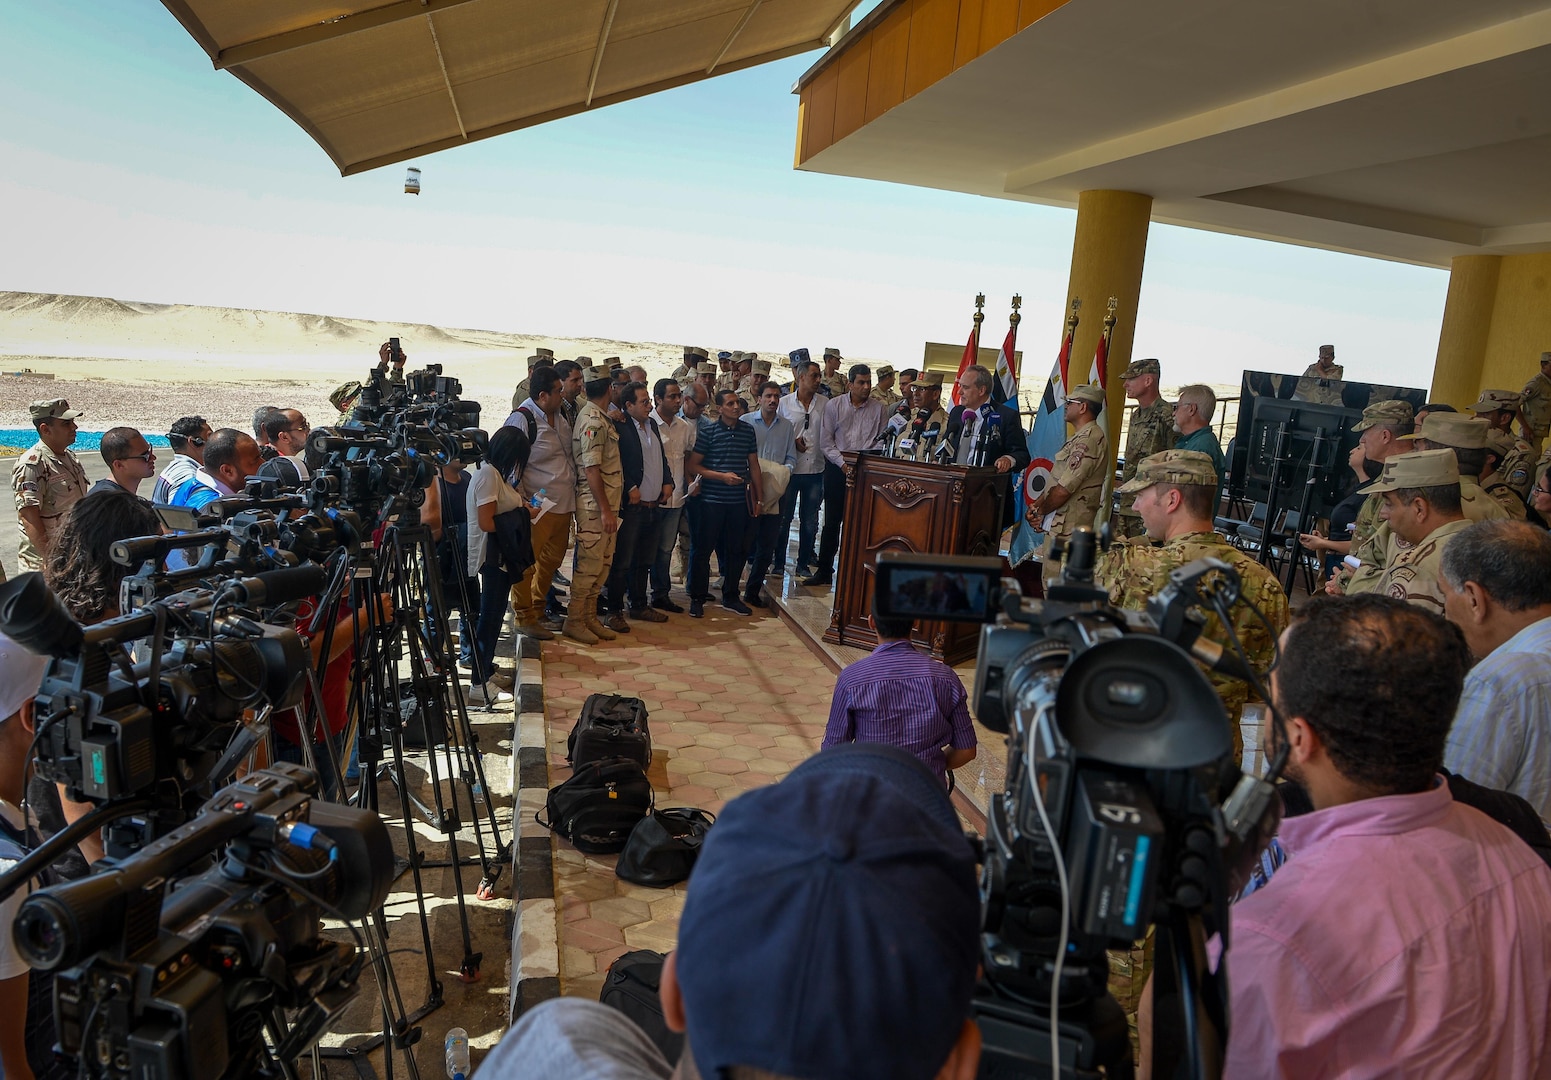 Thomas Goldberger, The U.S. Embassy’s Charge d’ Affaires to Egypt, answers questions from the media during the conclusion of Bright Star 2017, Sept. 20, 2017, at Mohamed Naguib Military Base, Egypt. Bright Star 2017 centralizes around regional security and cooperation, and promoting interoperability in conventional and irregular warfare scenarios. (U.S. Air Force photo by Staff Sgt. Michael Battles)